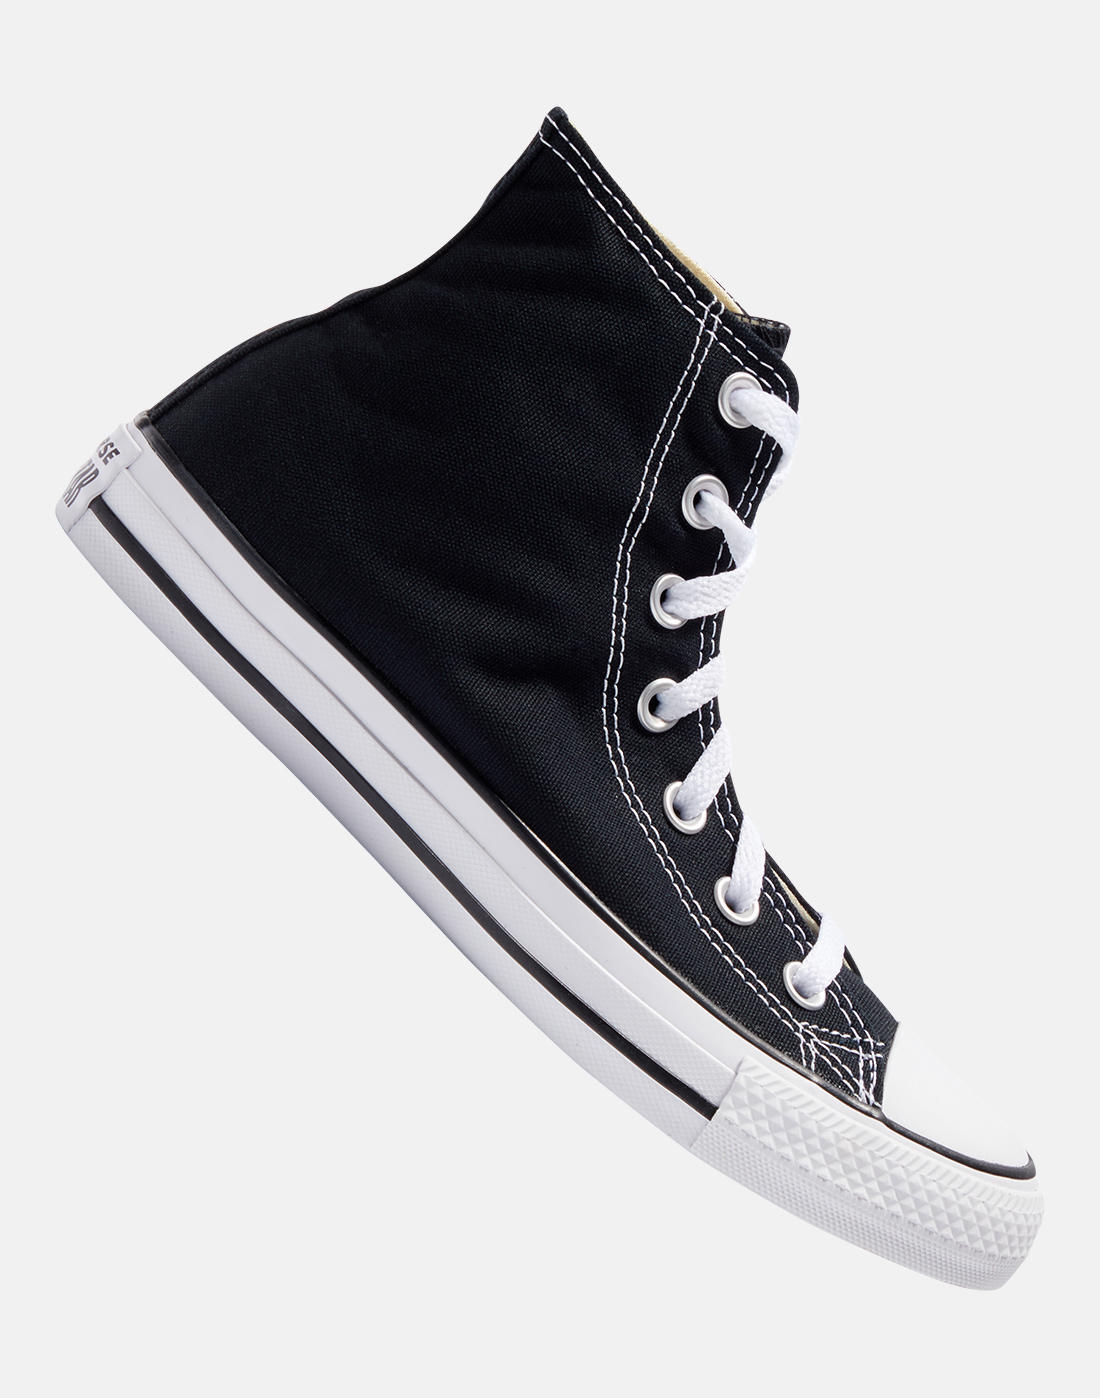 Converse Womens All Star Hi - Black | Life Style Sports IE